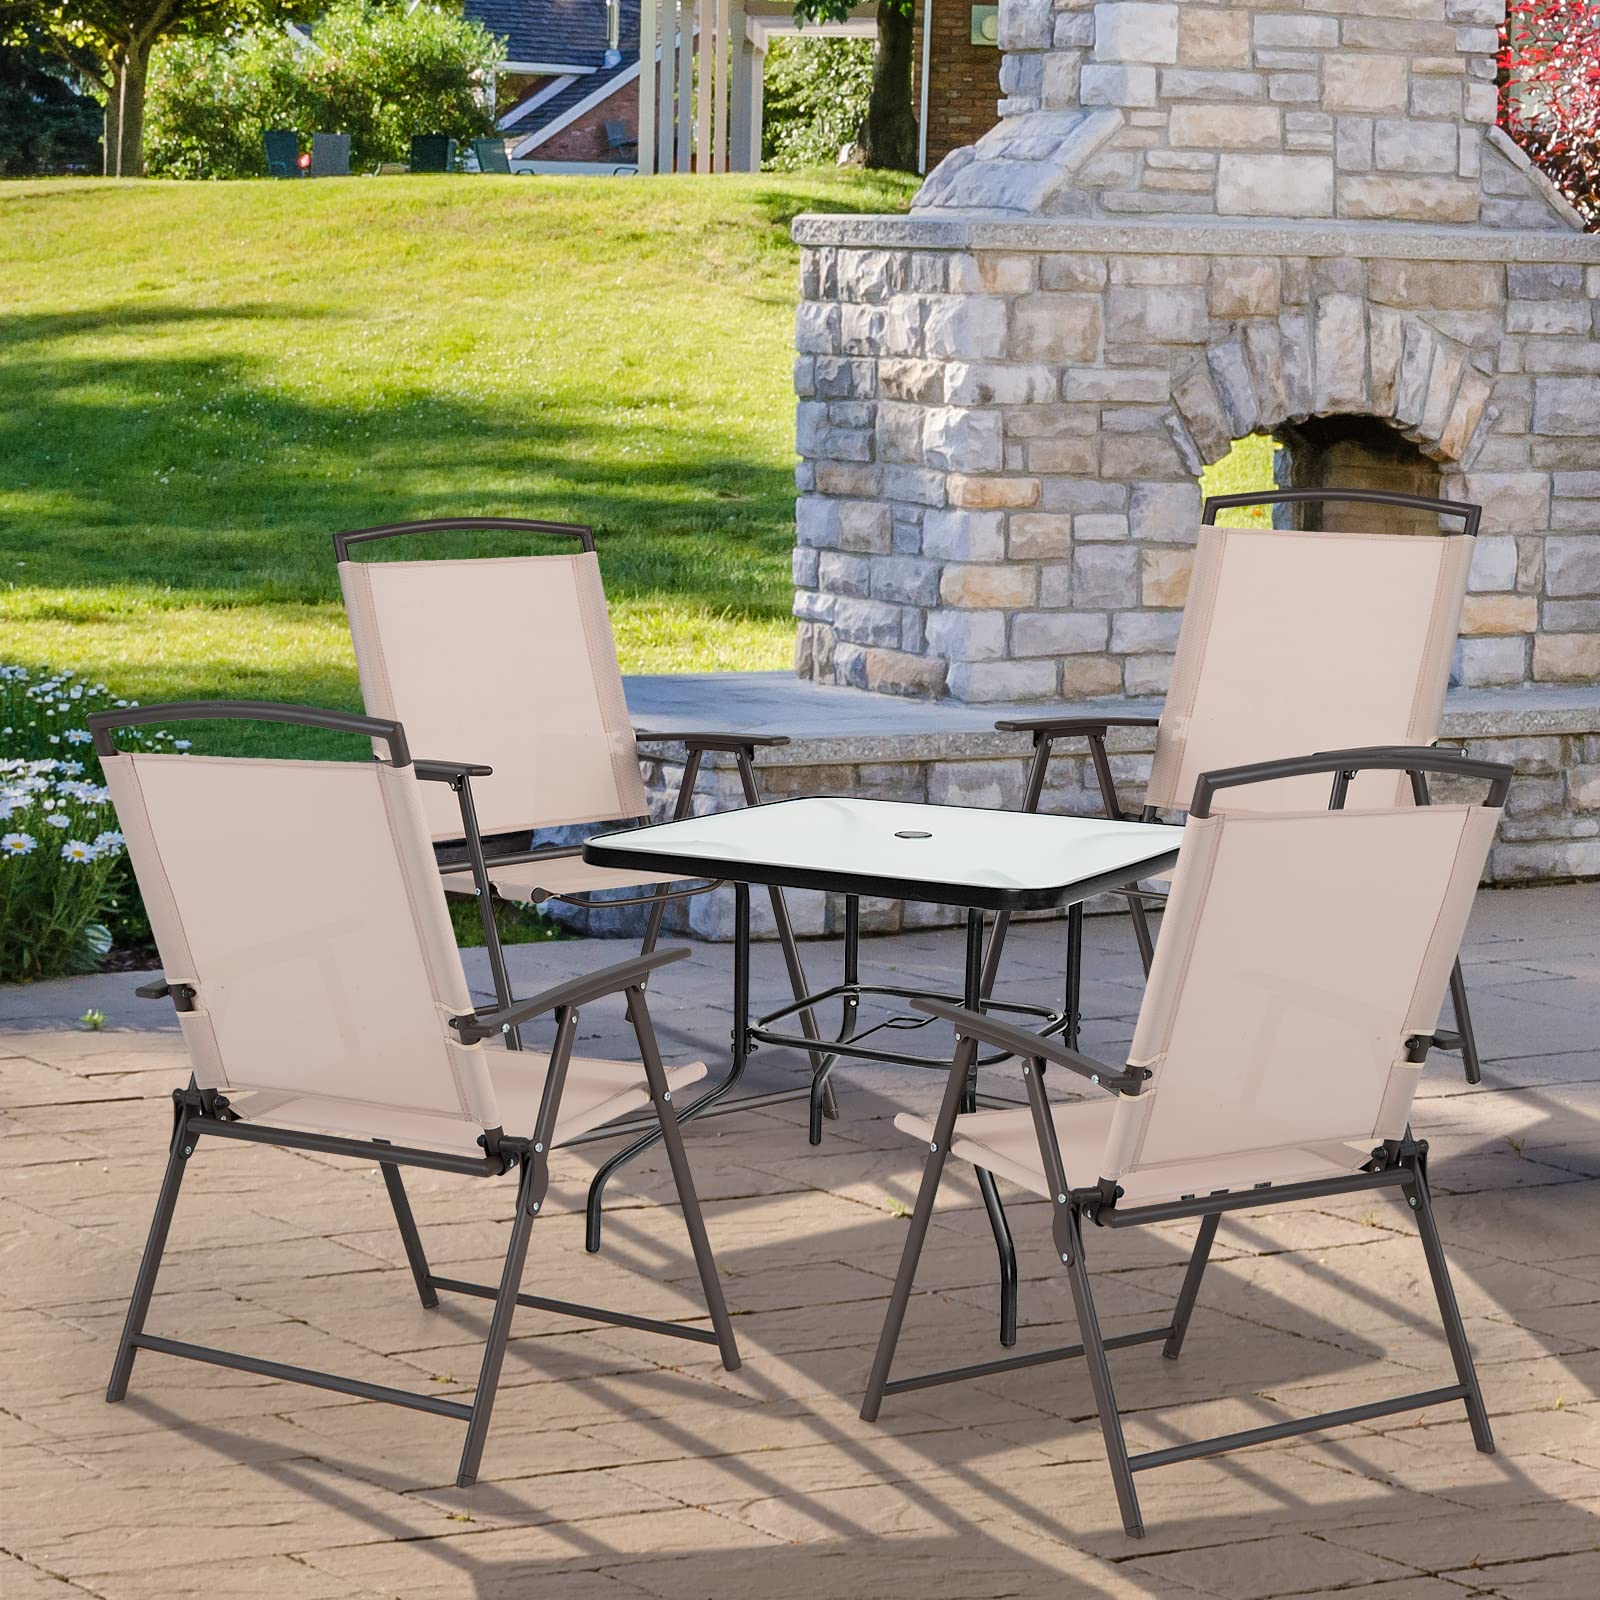 Giantex Set of 4 Patio Folding Chairs - Outdoor Sling Chairs